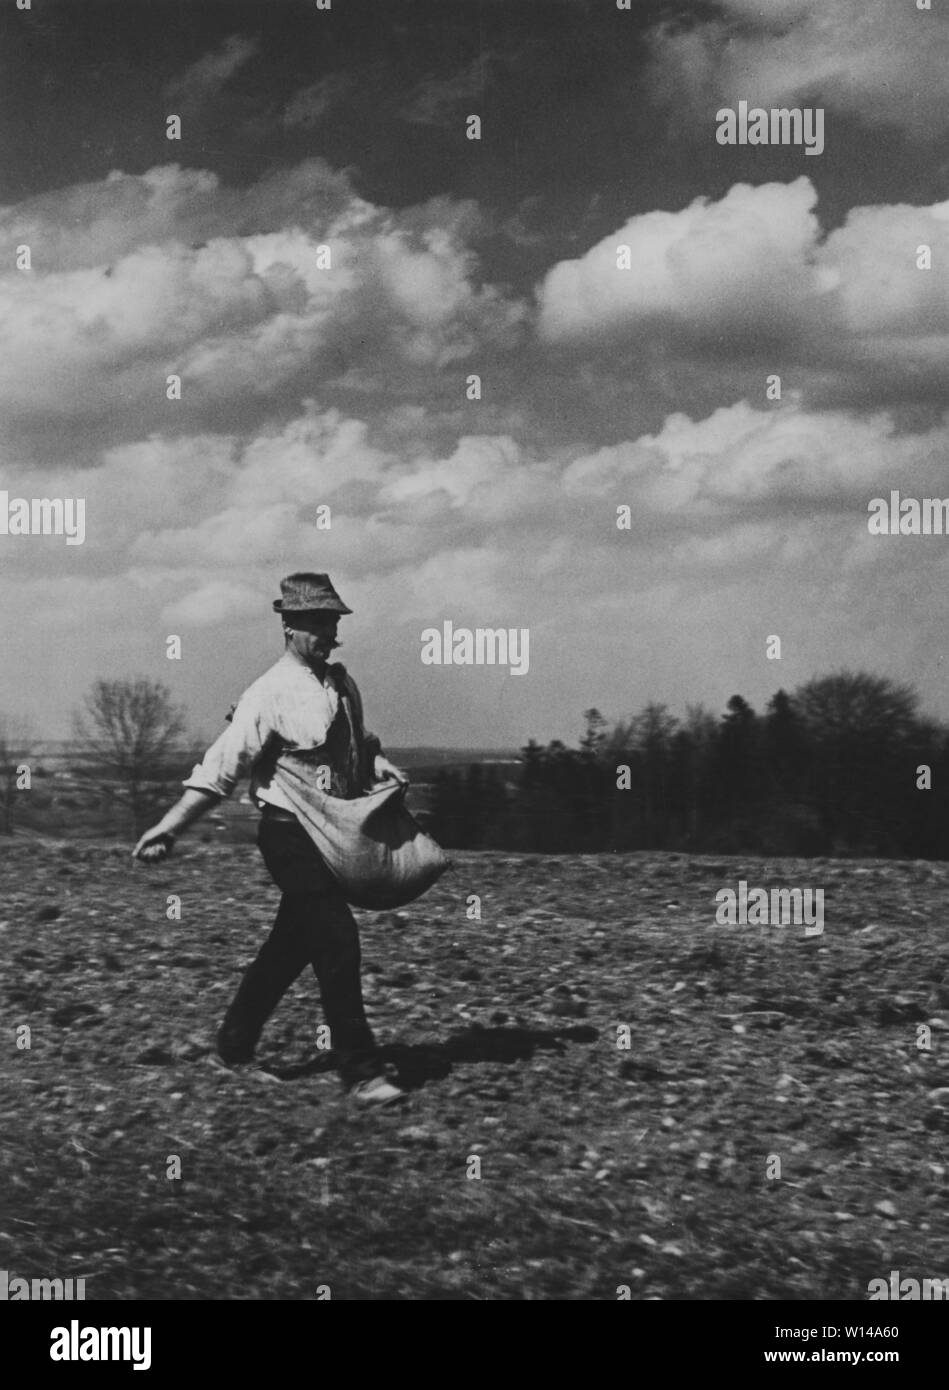 Farming in the 1930s. A man sowing seeds by hand on a field, a method that demands a certain amount of skill to make the result perfect. Sweden 1930s. Stock Photo